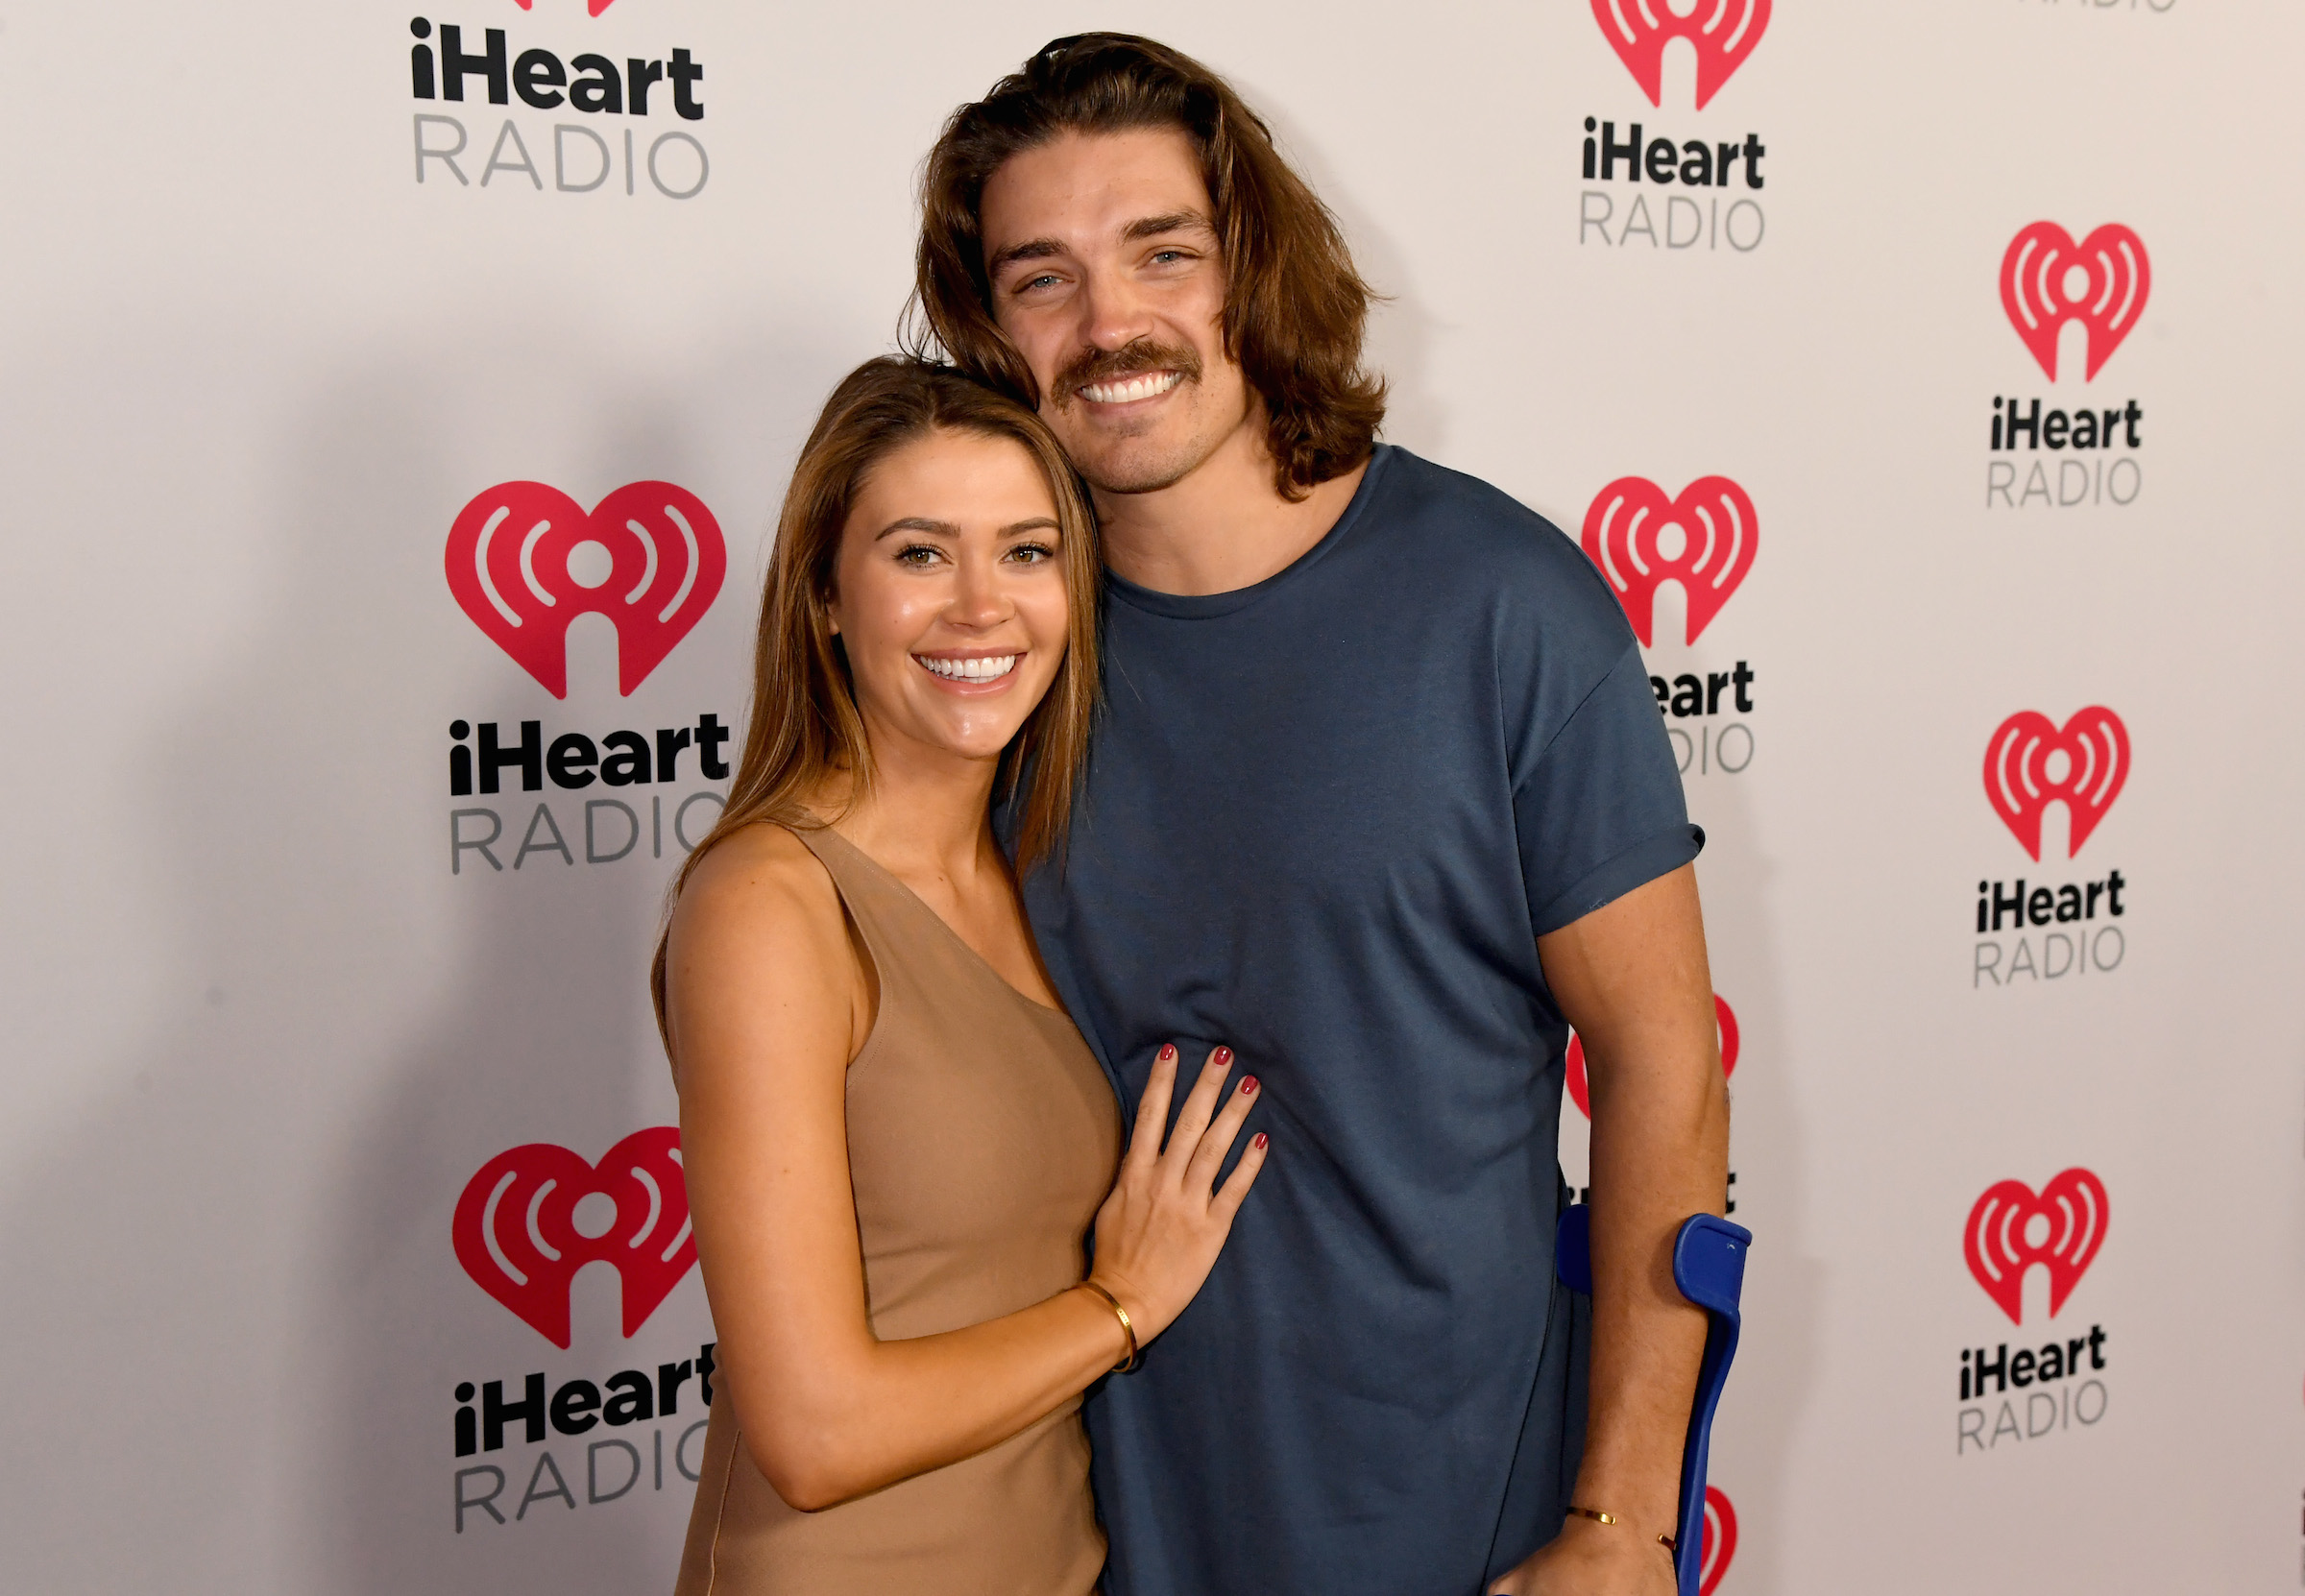 Caelynn Miller-Keyes and Dean Unglert attend the 2020 iHeartRadio Podcast Awards